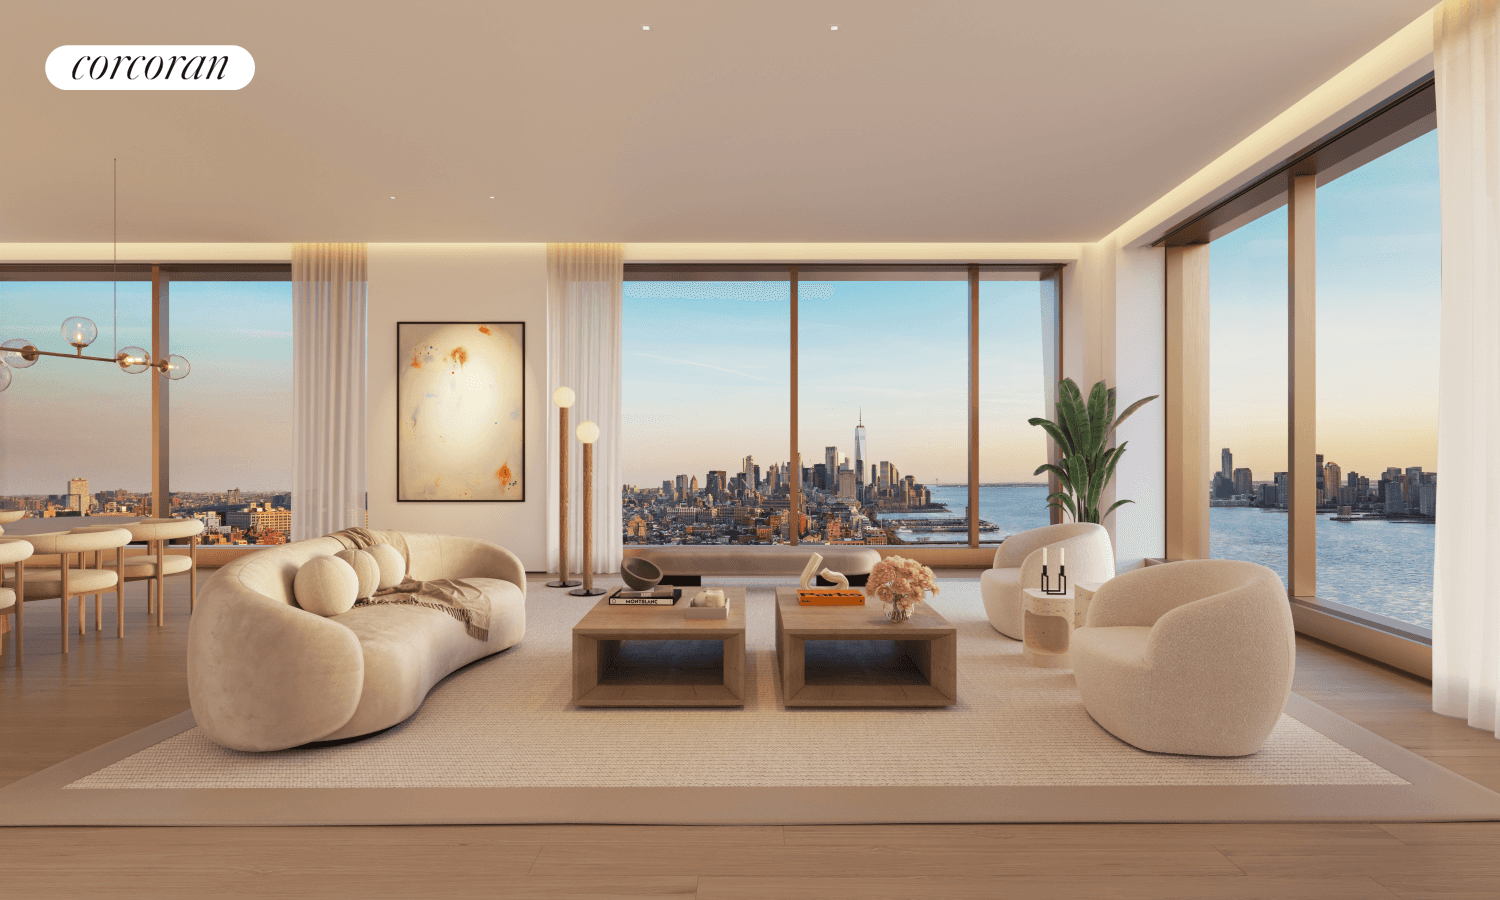 West 30B is a 3, 166 SF three bedroom and three and a half bathroom corner residence curated by Gabellini Sheppard Associates.